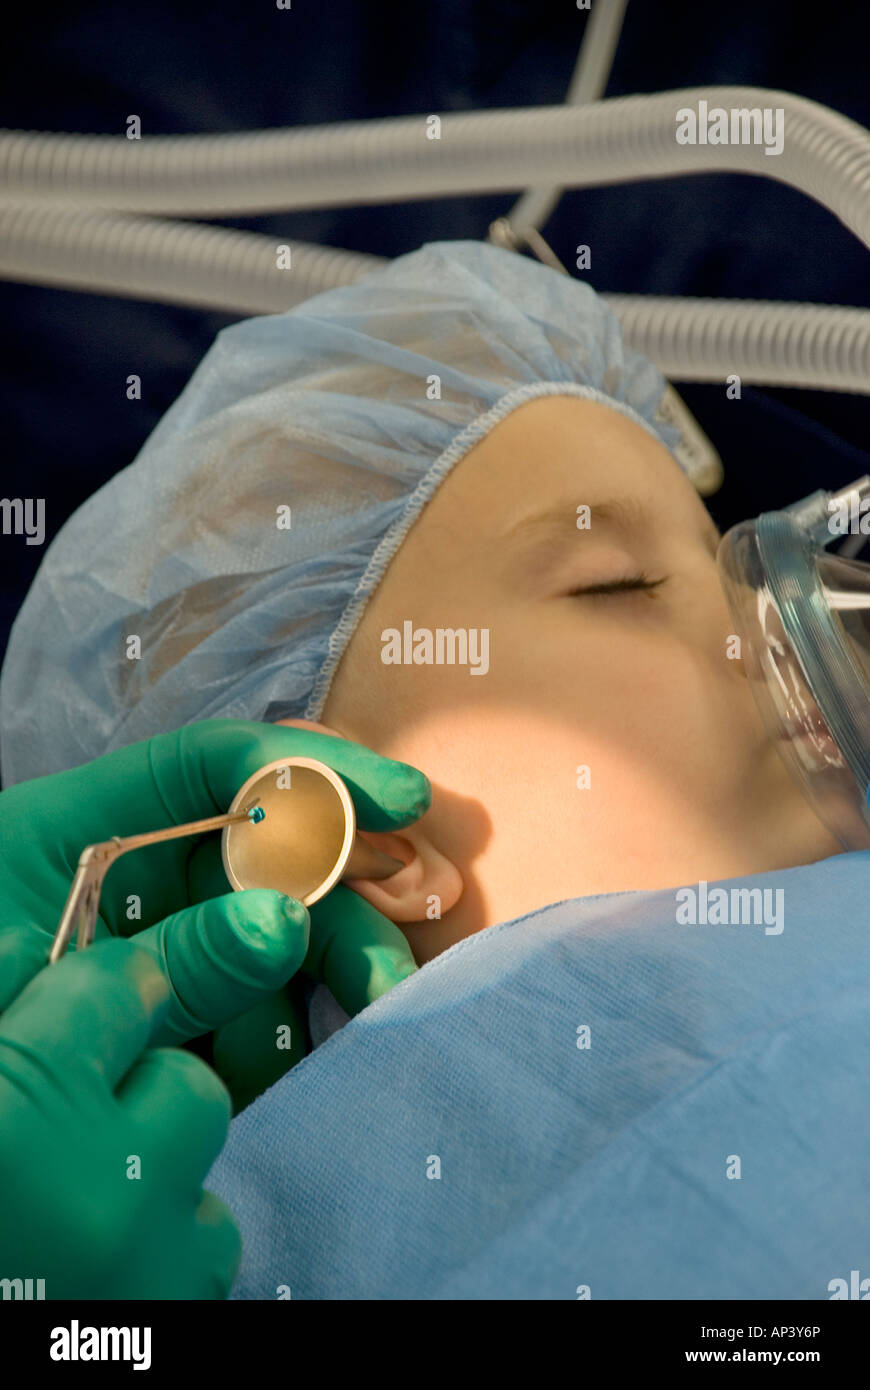 Young boy undergoing ear surgery in hospital operating room Stock Photo